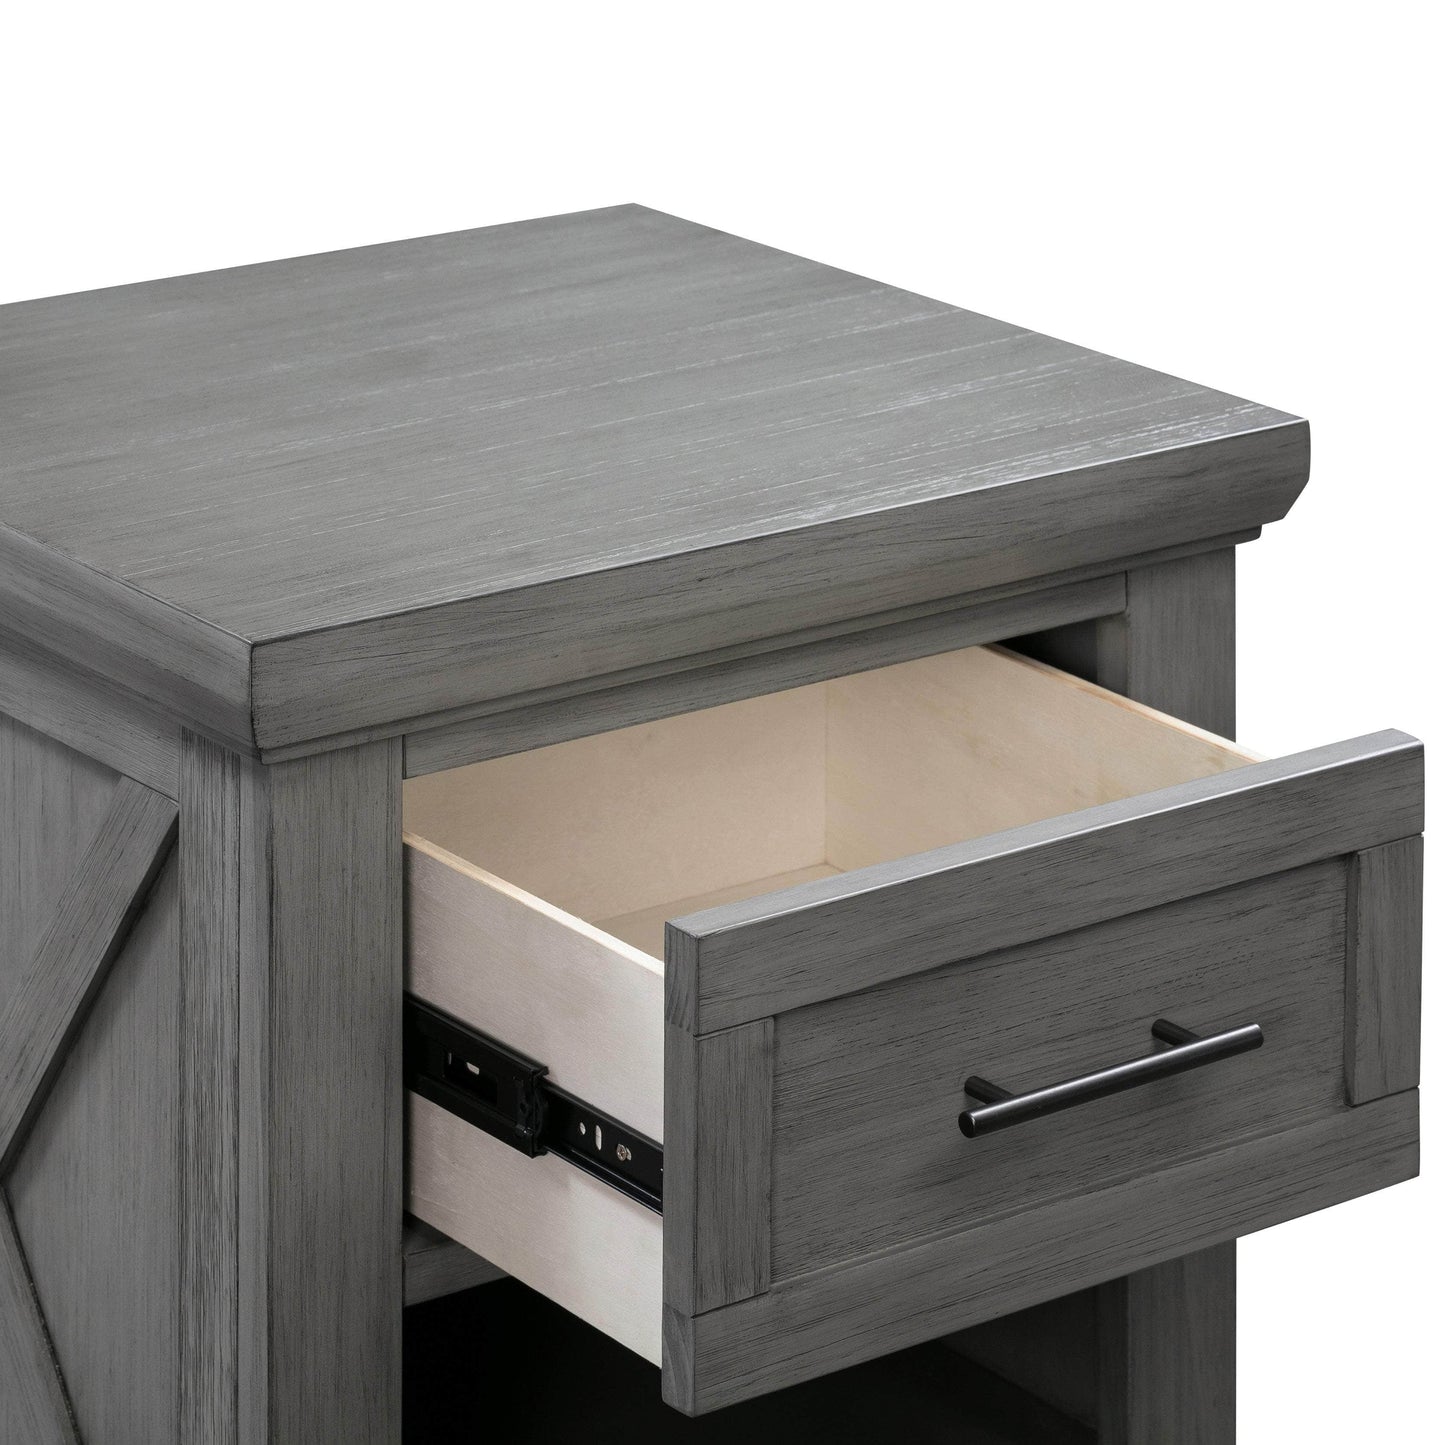 B14560WC,Emory Farmhouse Nightstand in Weathered Charcoal